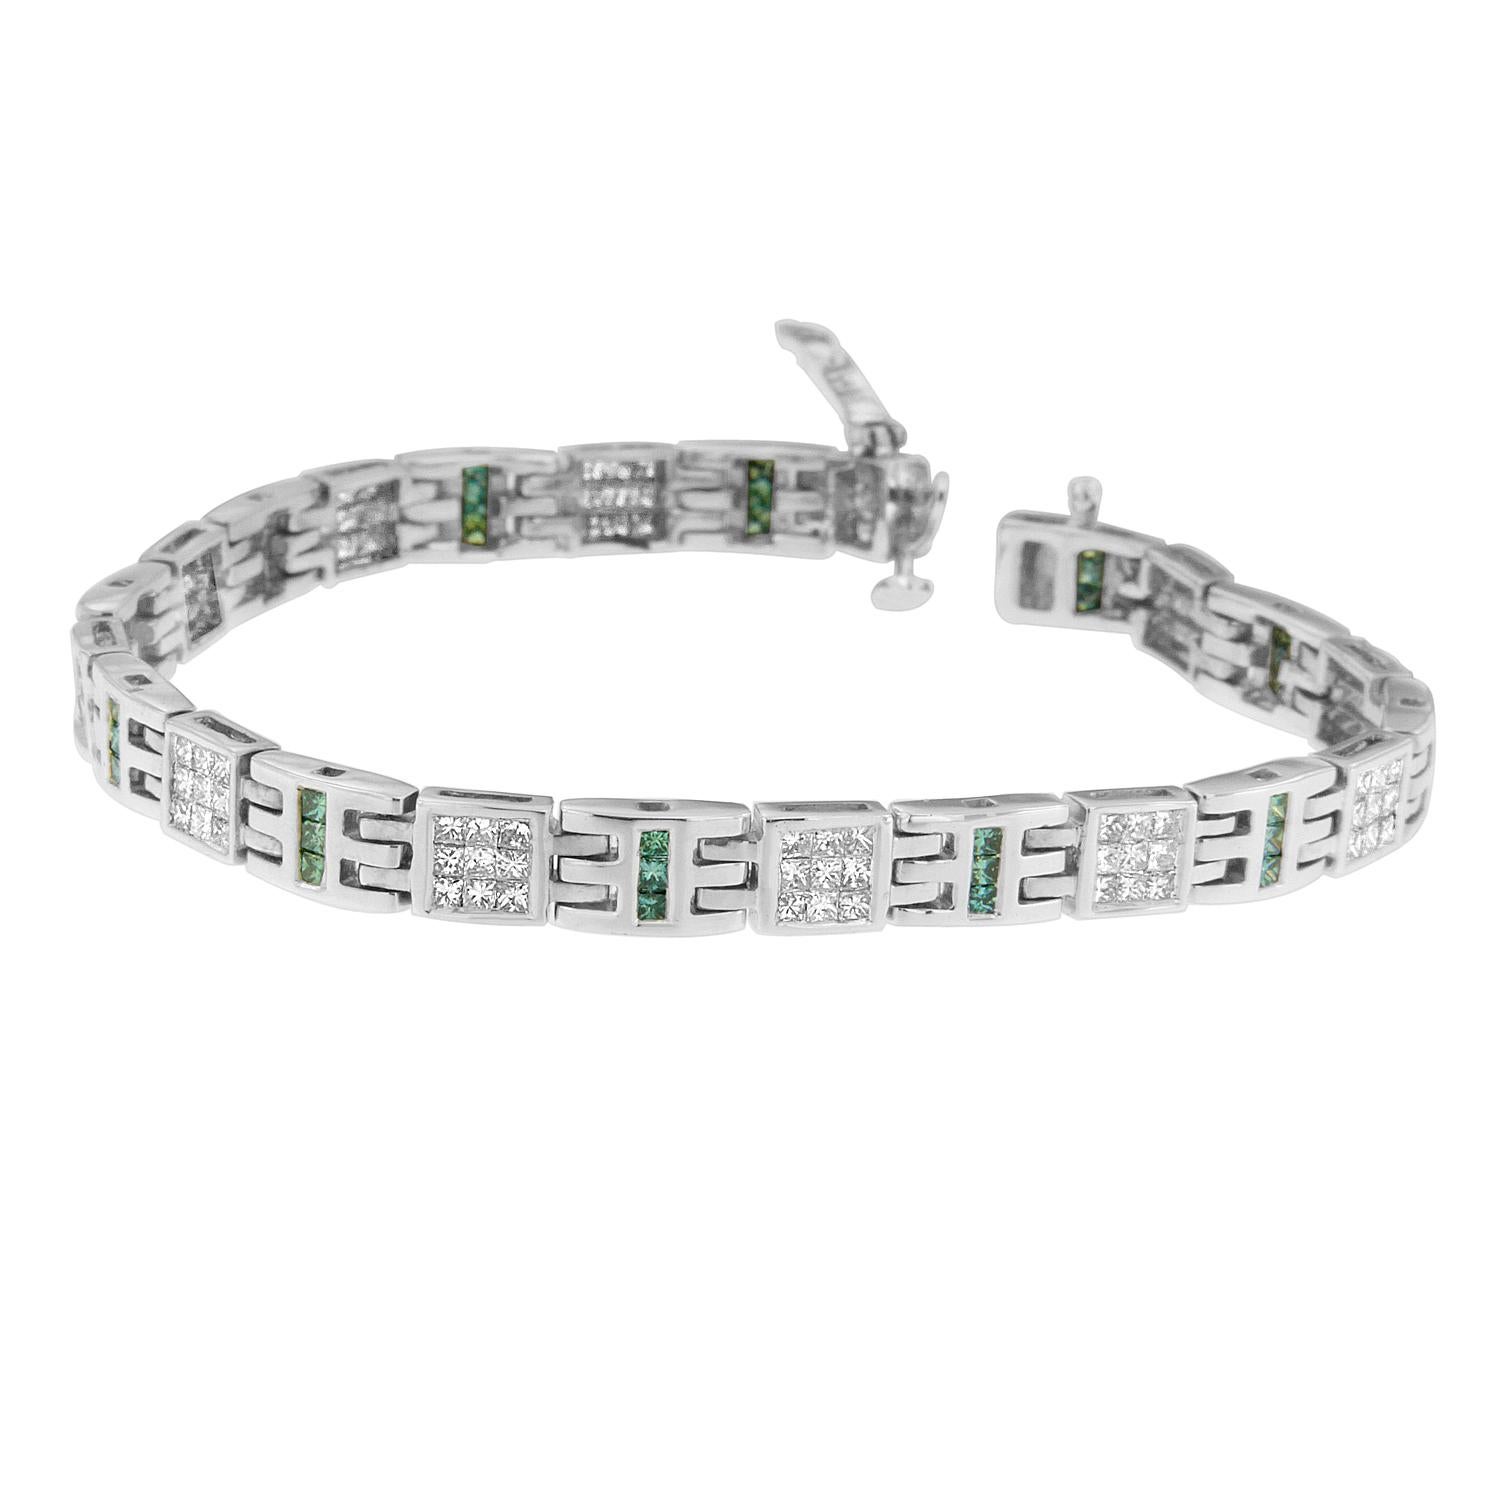 Oh-so-neat, chic, and sleek, this interlinked tennis style bracelet will take her look to a new level. Crafted in 14 karat white gold, the intriguing design features a dazzling invisible setting arrangement of princess cut diamonds in blue and